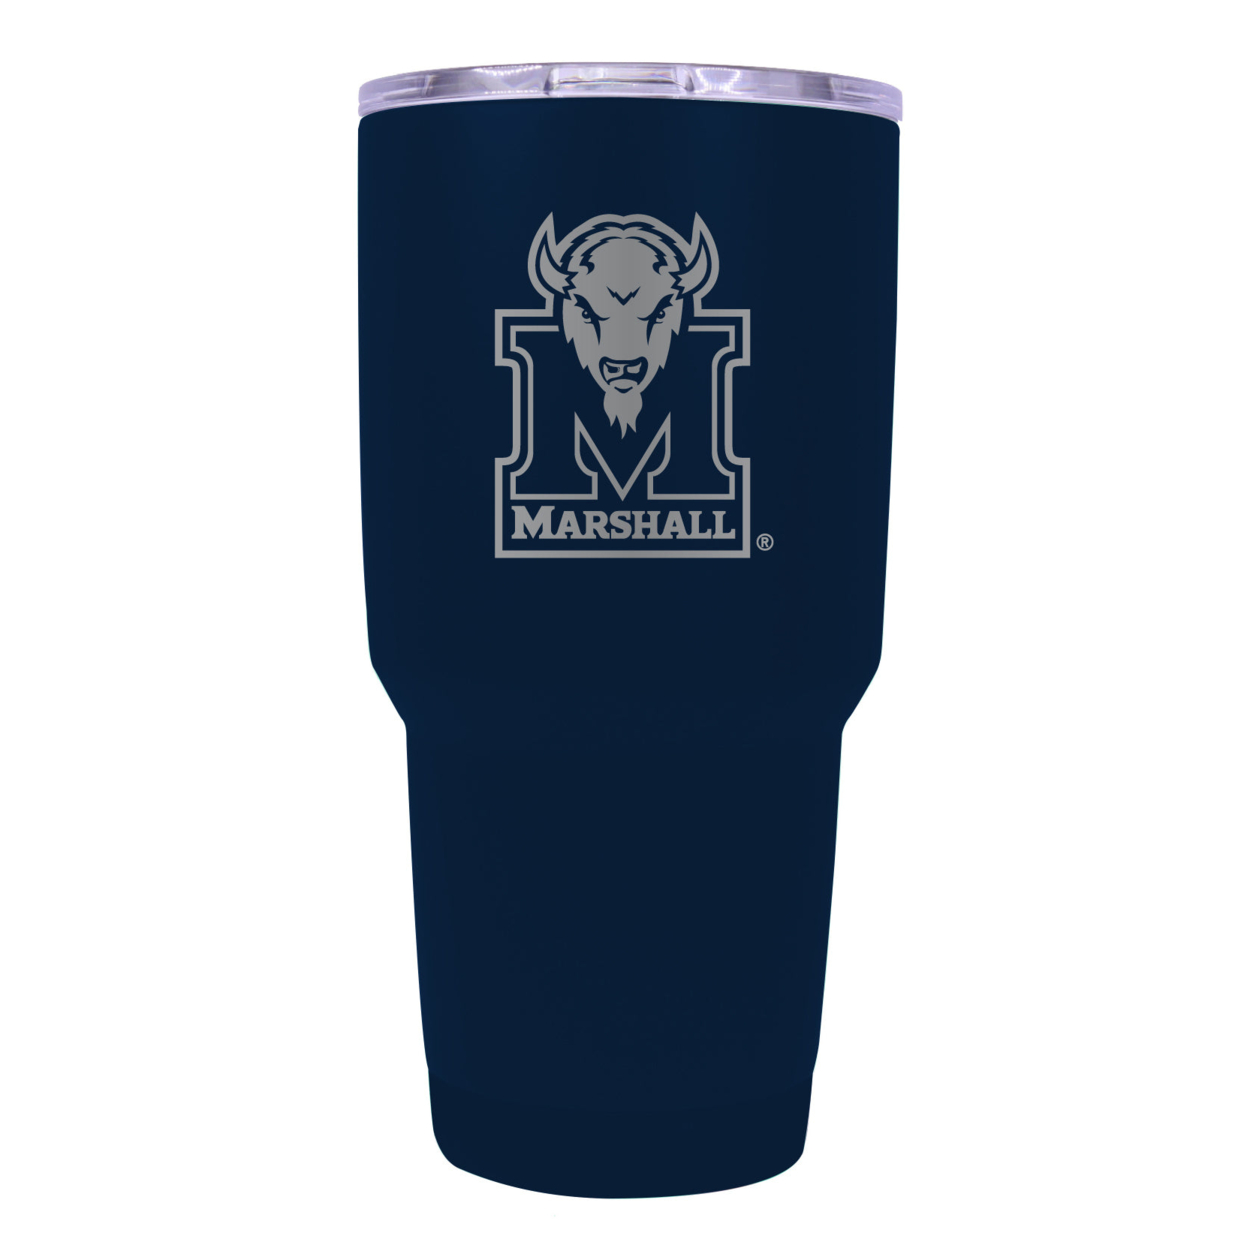 Marshall Thundering Herd 24 Oz Insulated Tumbler Etched - Choose Your Color - Seafoam